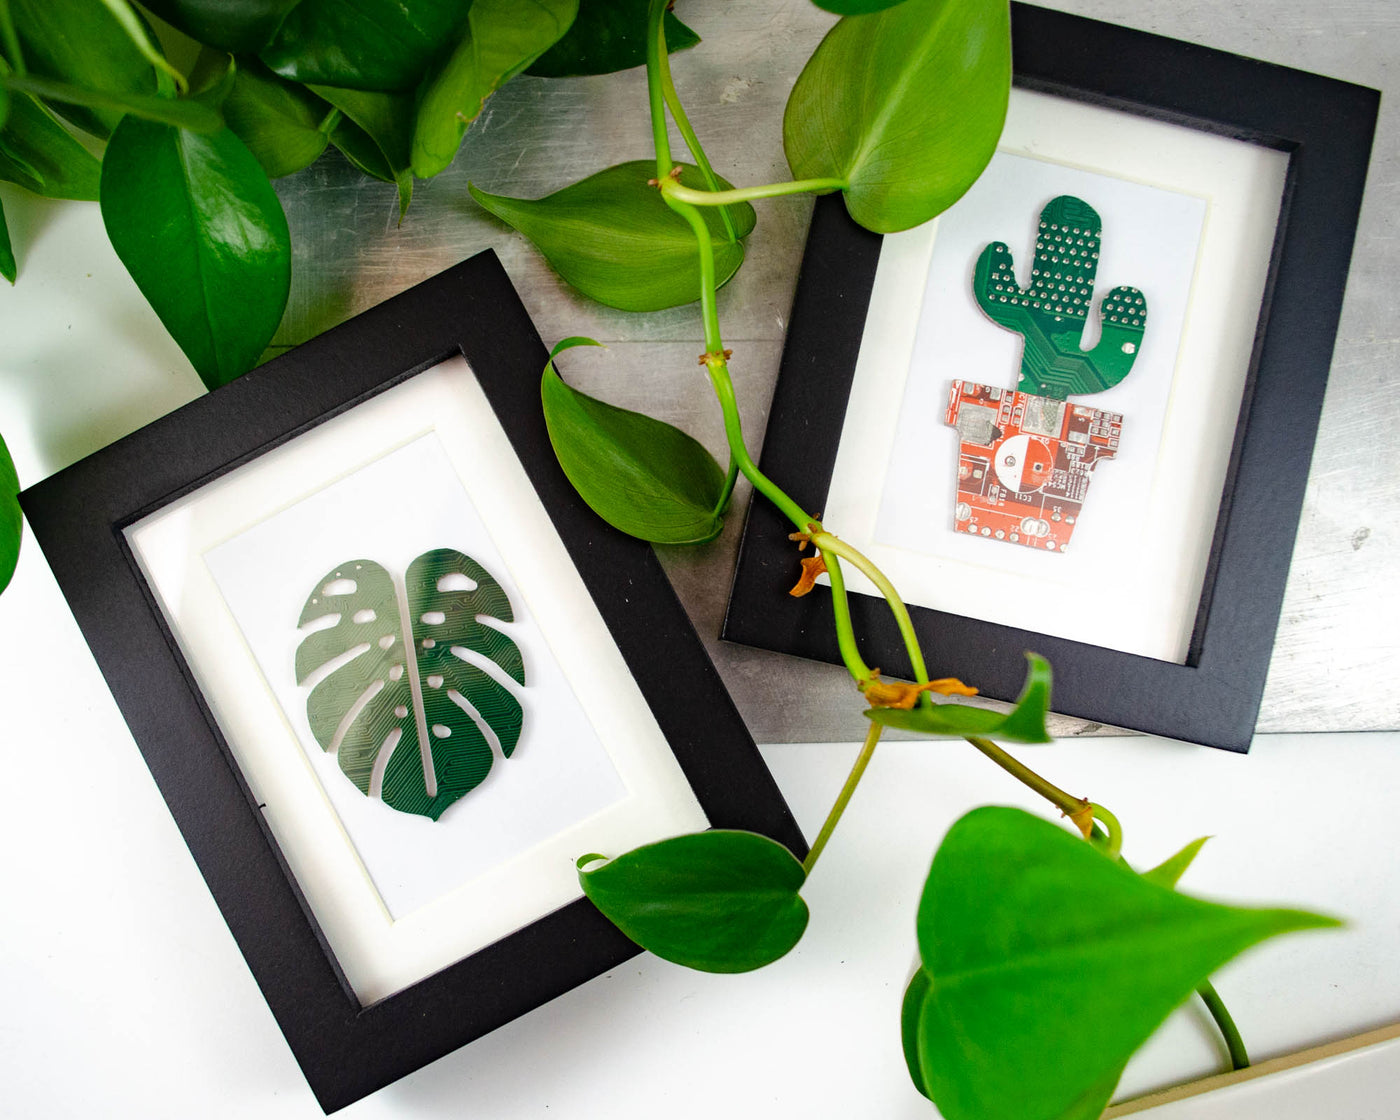 handmade recycled circuit board framed art piece for your desk inspired by houseplants. Custom art pieces feature monstera and potted cactus imagery 